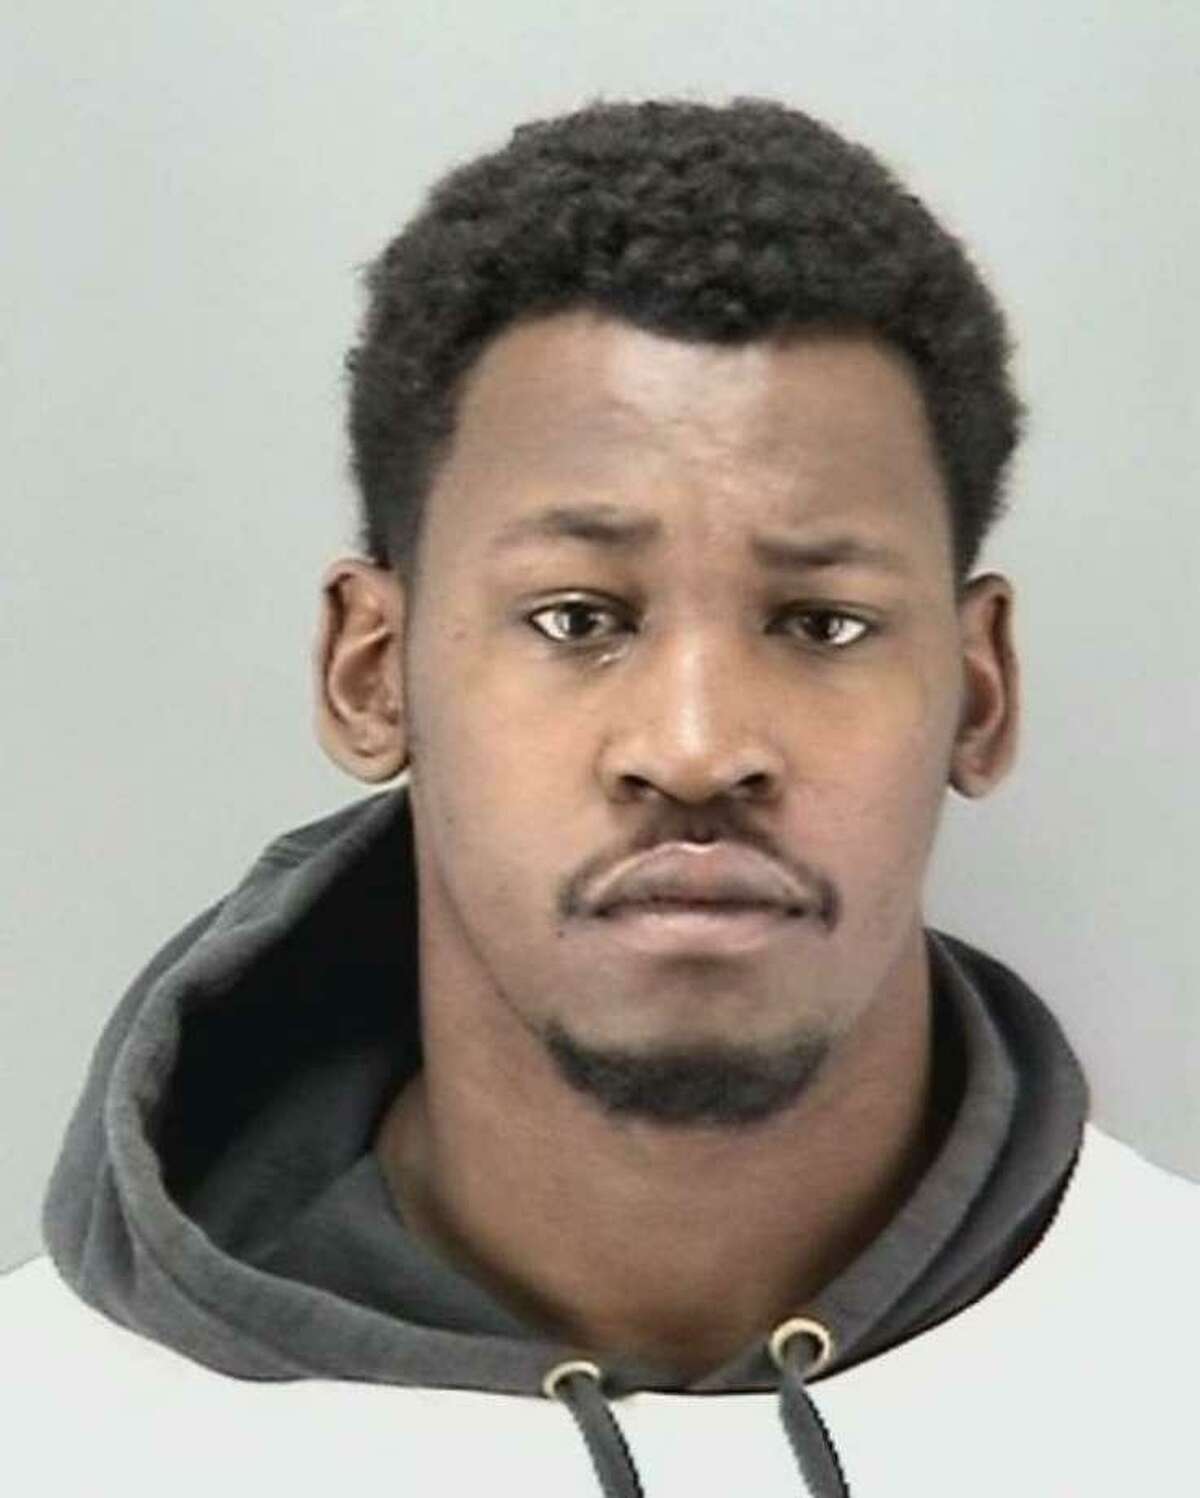 Aldon Smith in a booking photo provided by the San Francisco Police Department on Tuesday, March 6, 2018.